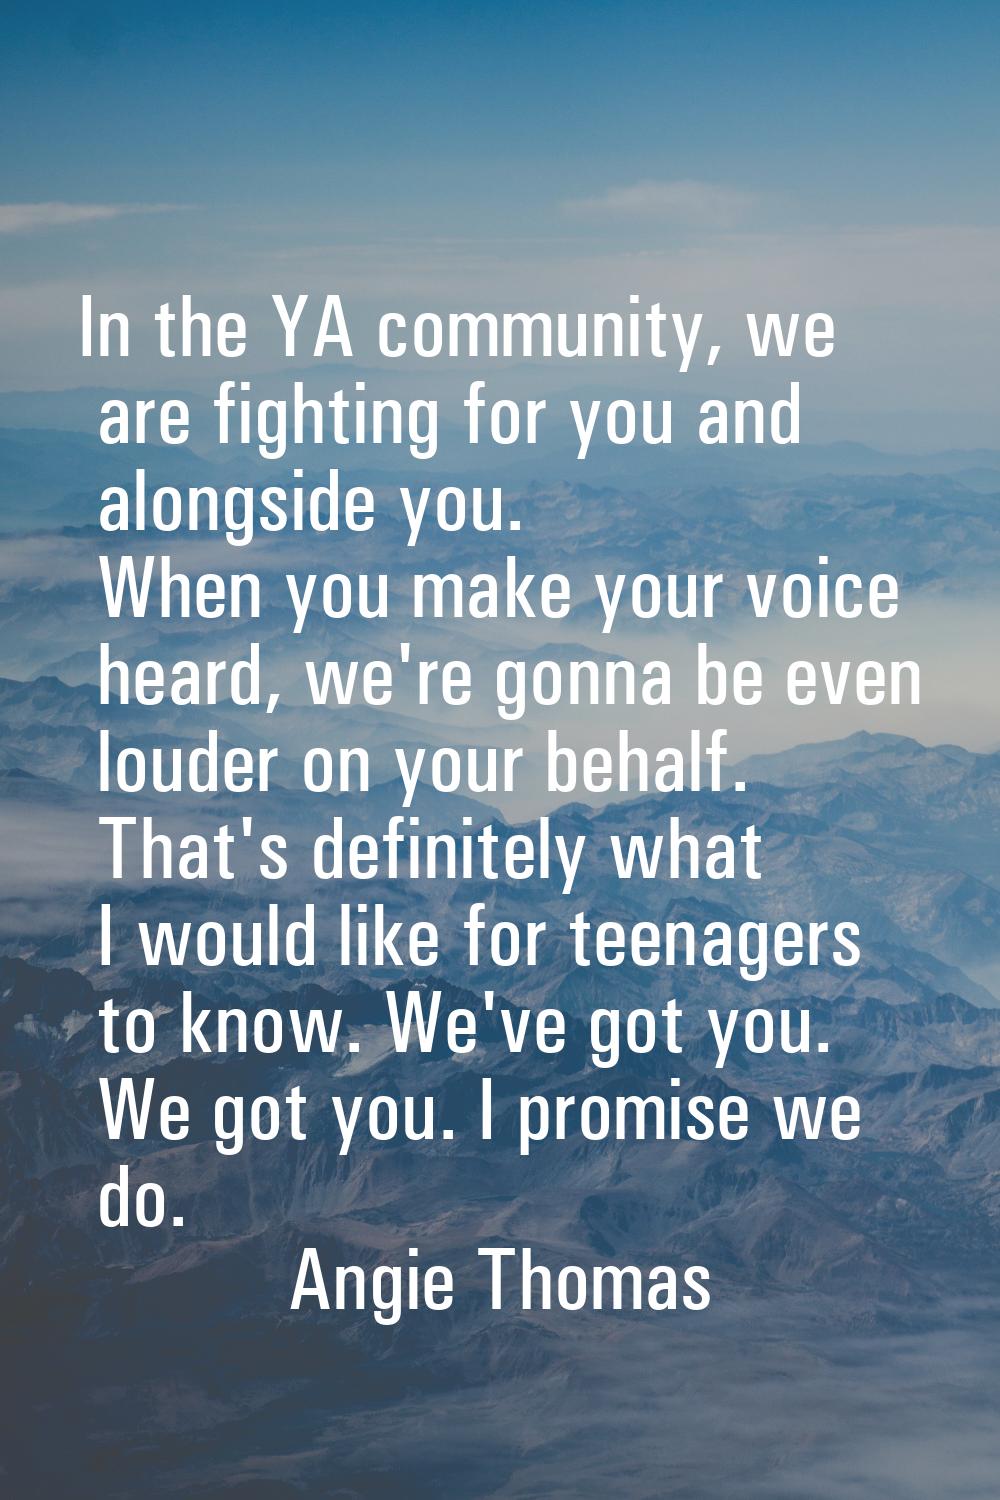 In the YA community, we are fighting for you and alongside you. When you make your voice heard, we'